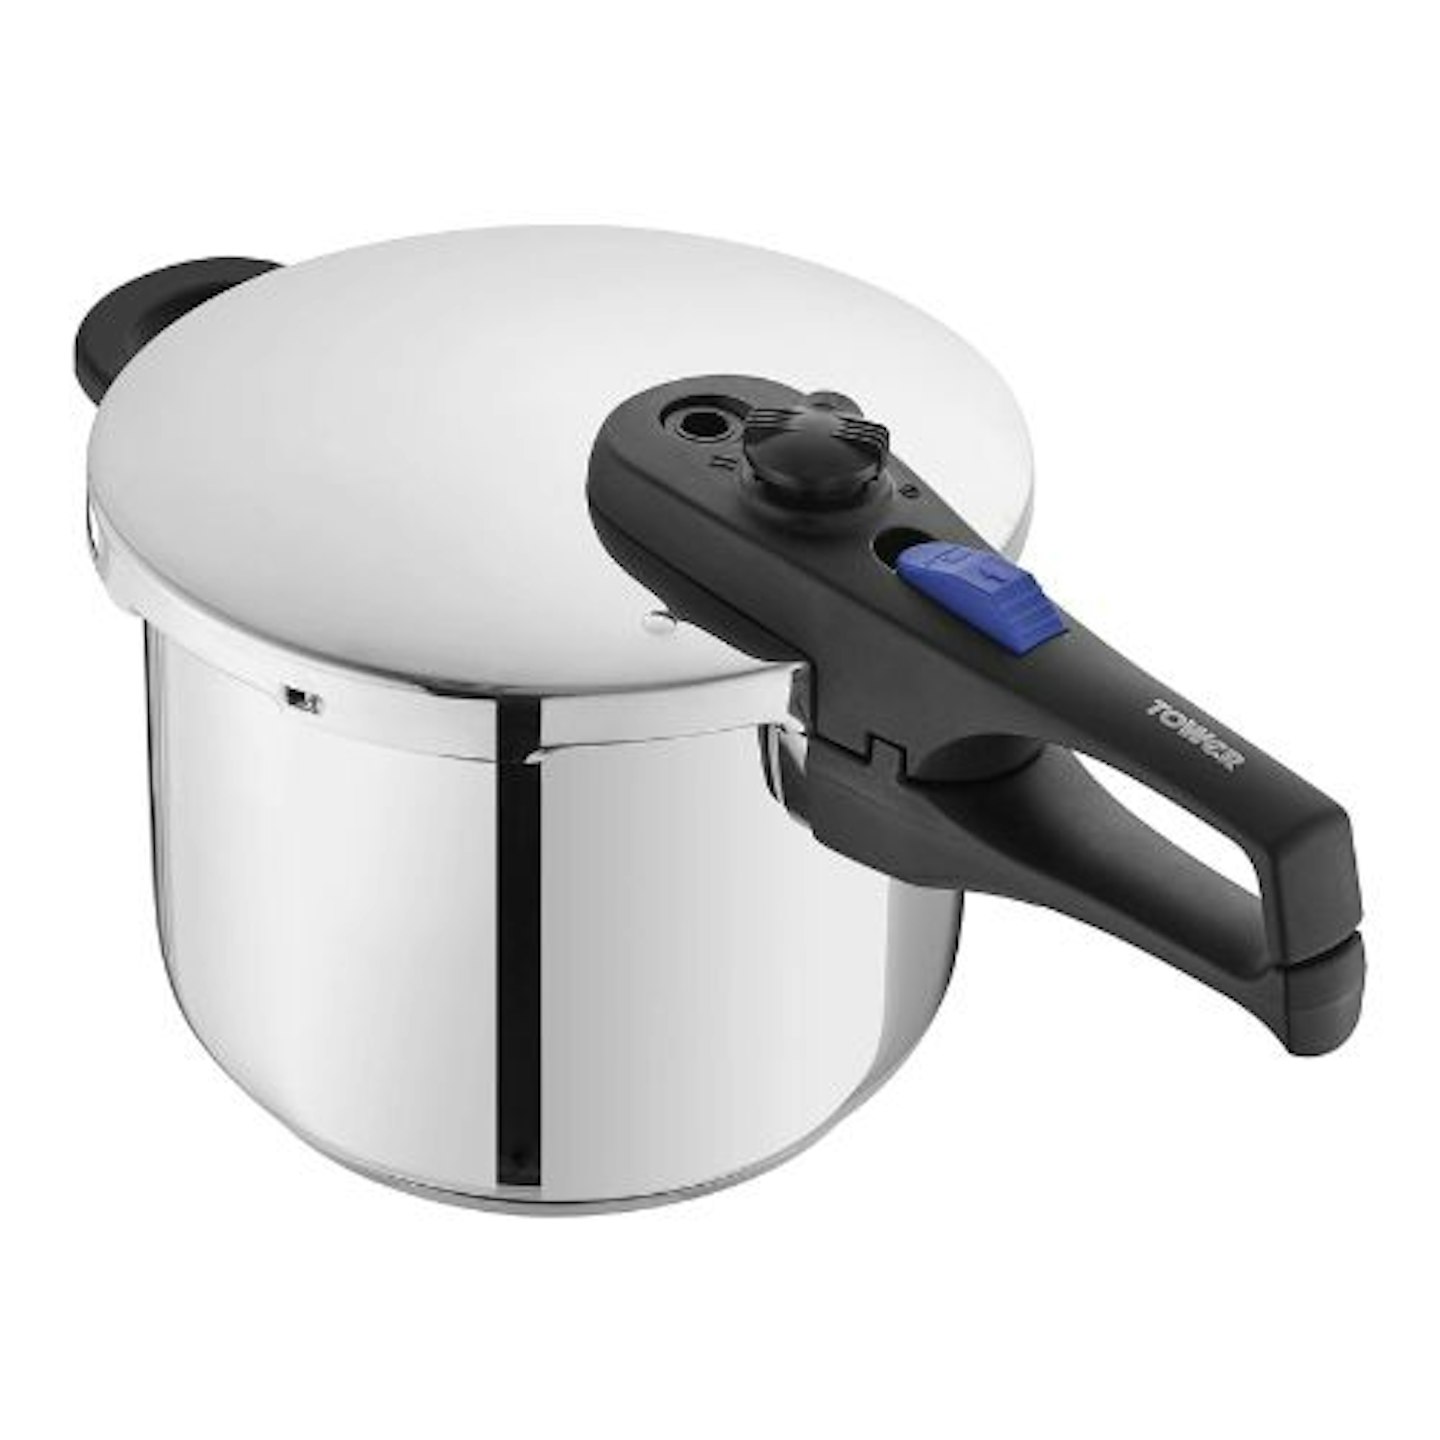 Tower Express Pressure Cooker